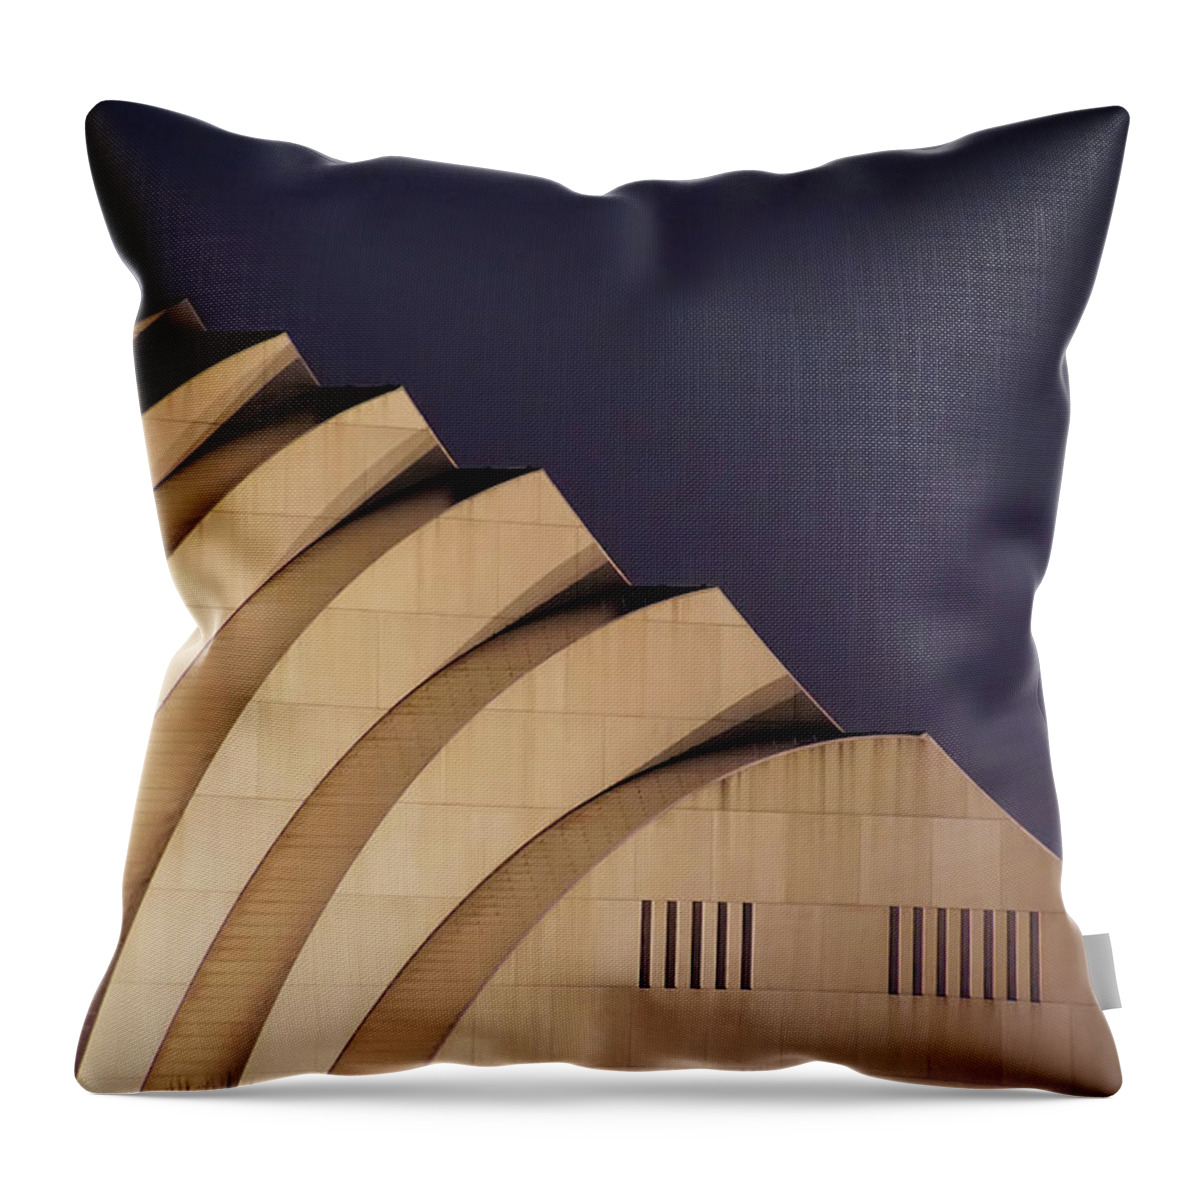 Kauffman Center For The Performing Arts Throw Pillow featuring the photograph Kauffman Center for the Performing Arts by Alan Hutchins